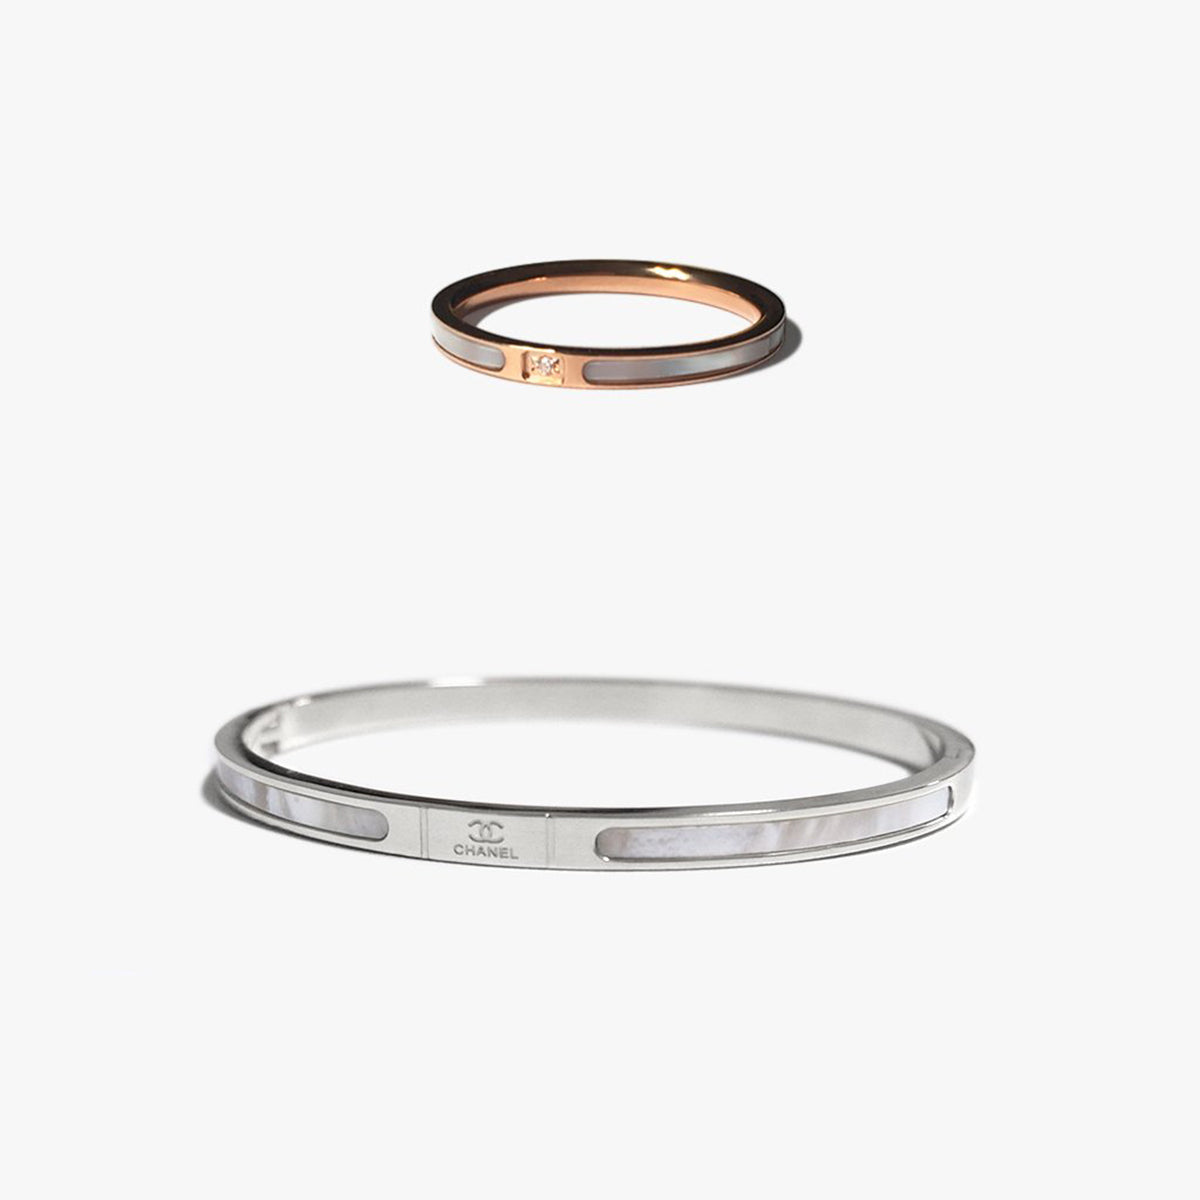 The Pearl Ring and Bangle Bundle